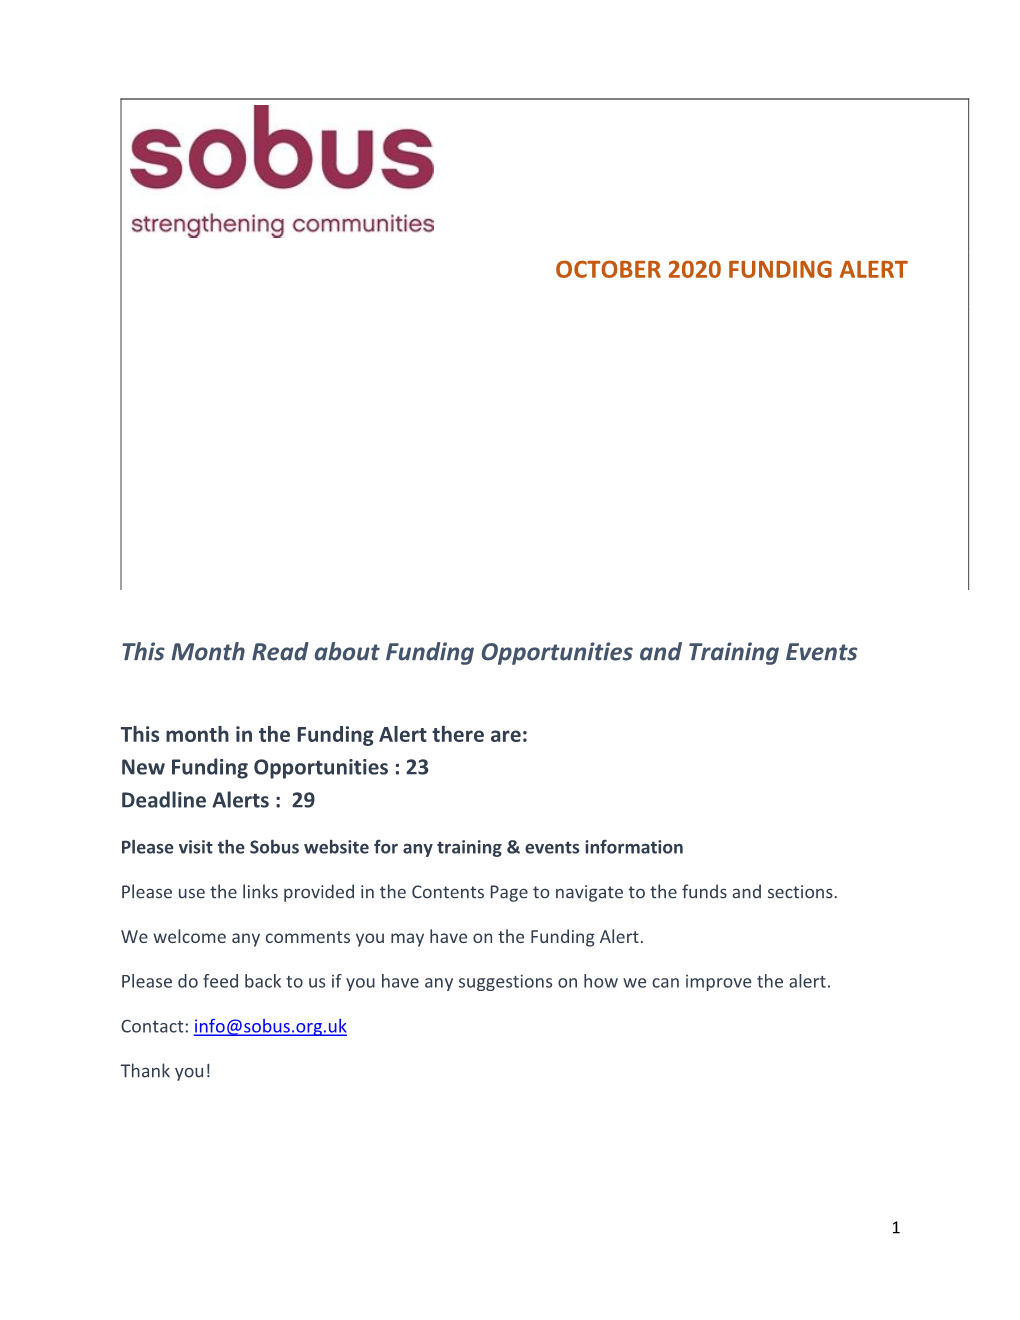 This Month Read About Funding Opportunities and Training Events